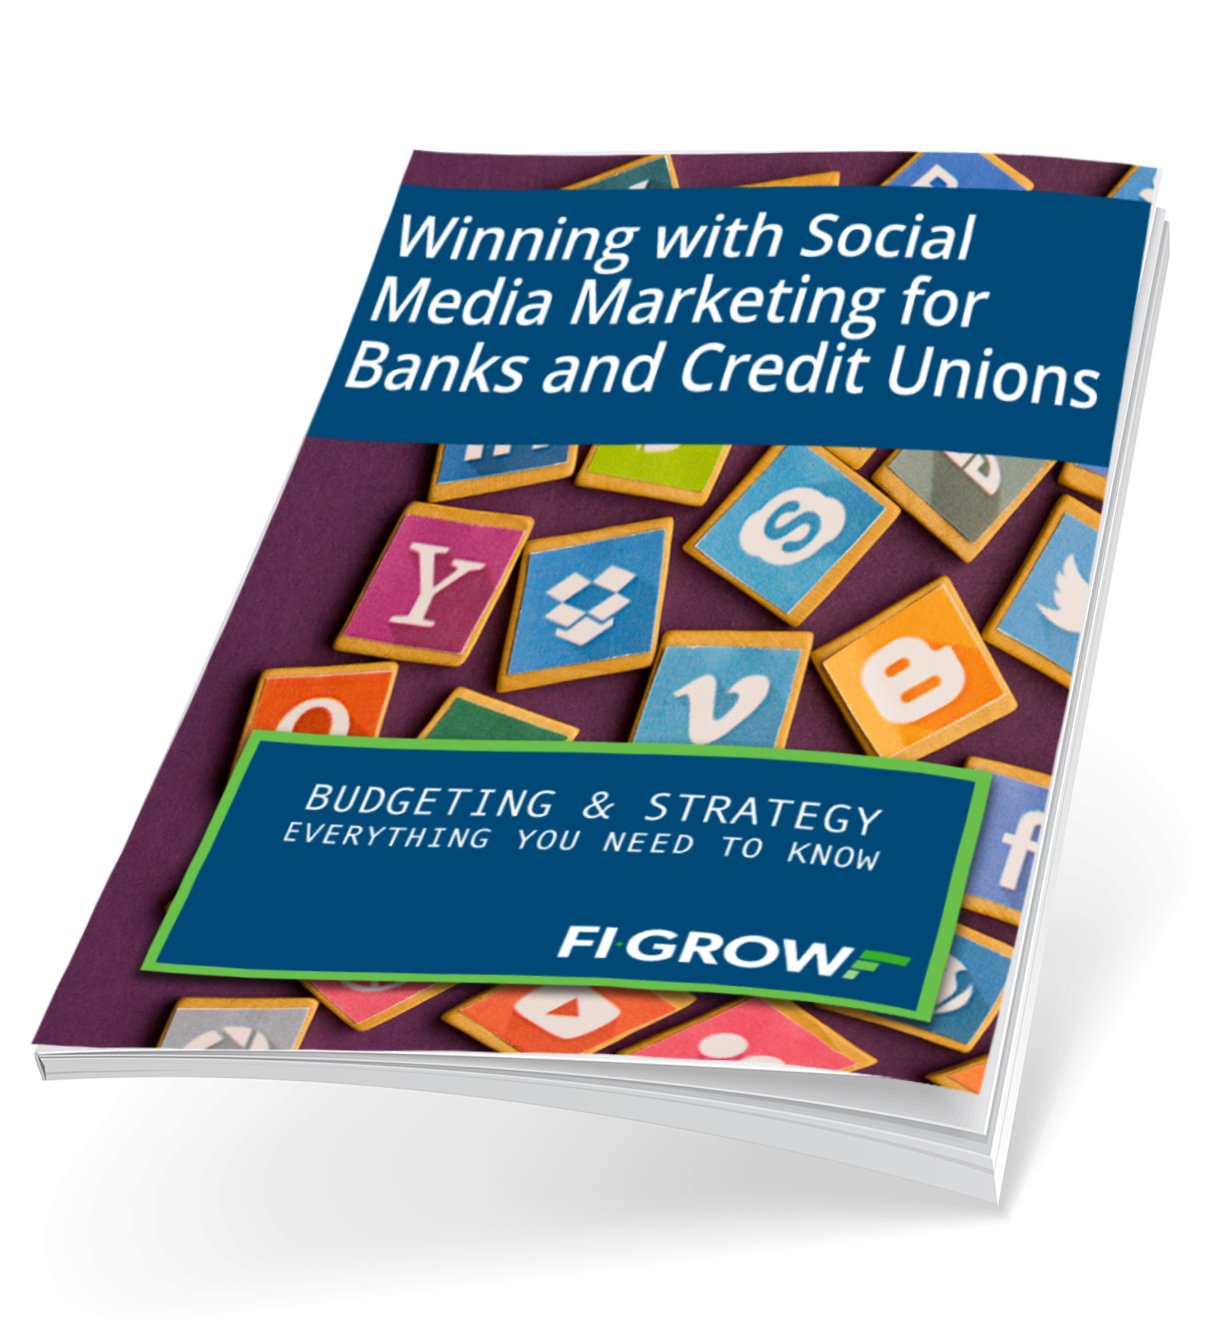 Winning with Social Media Marketing for Banks & Credit Unions